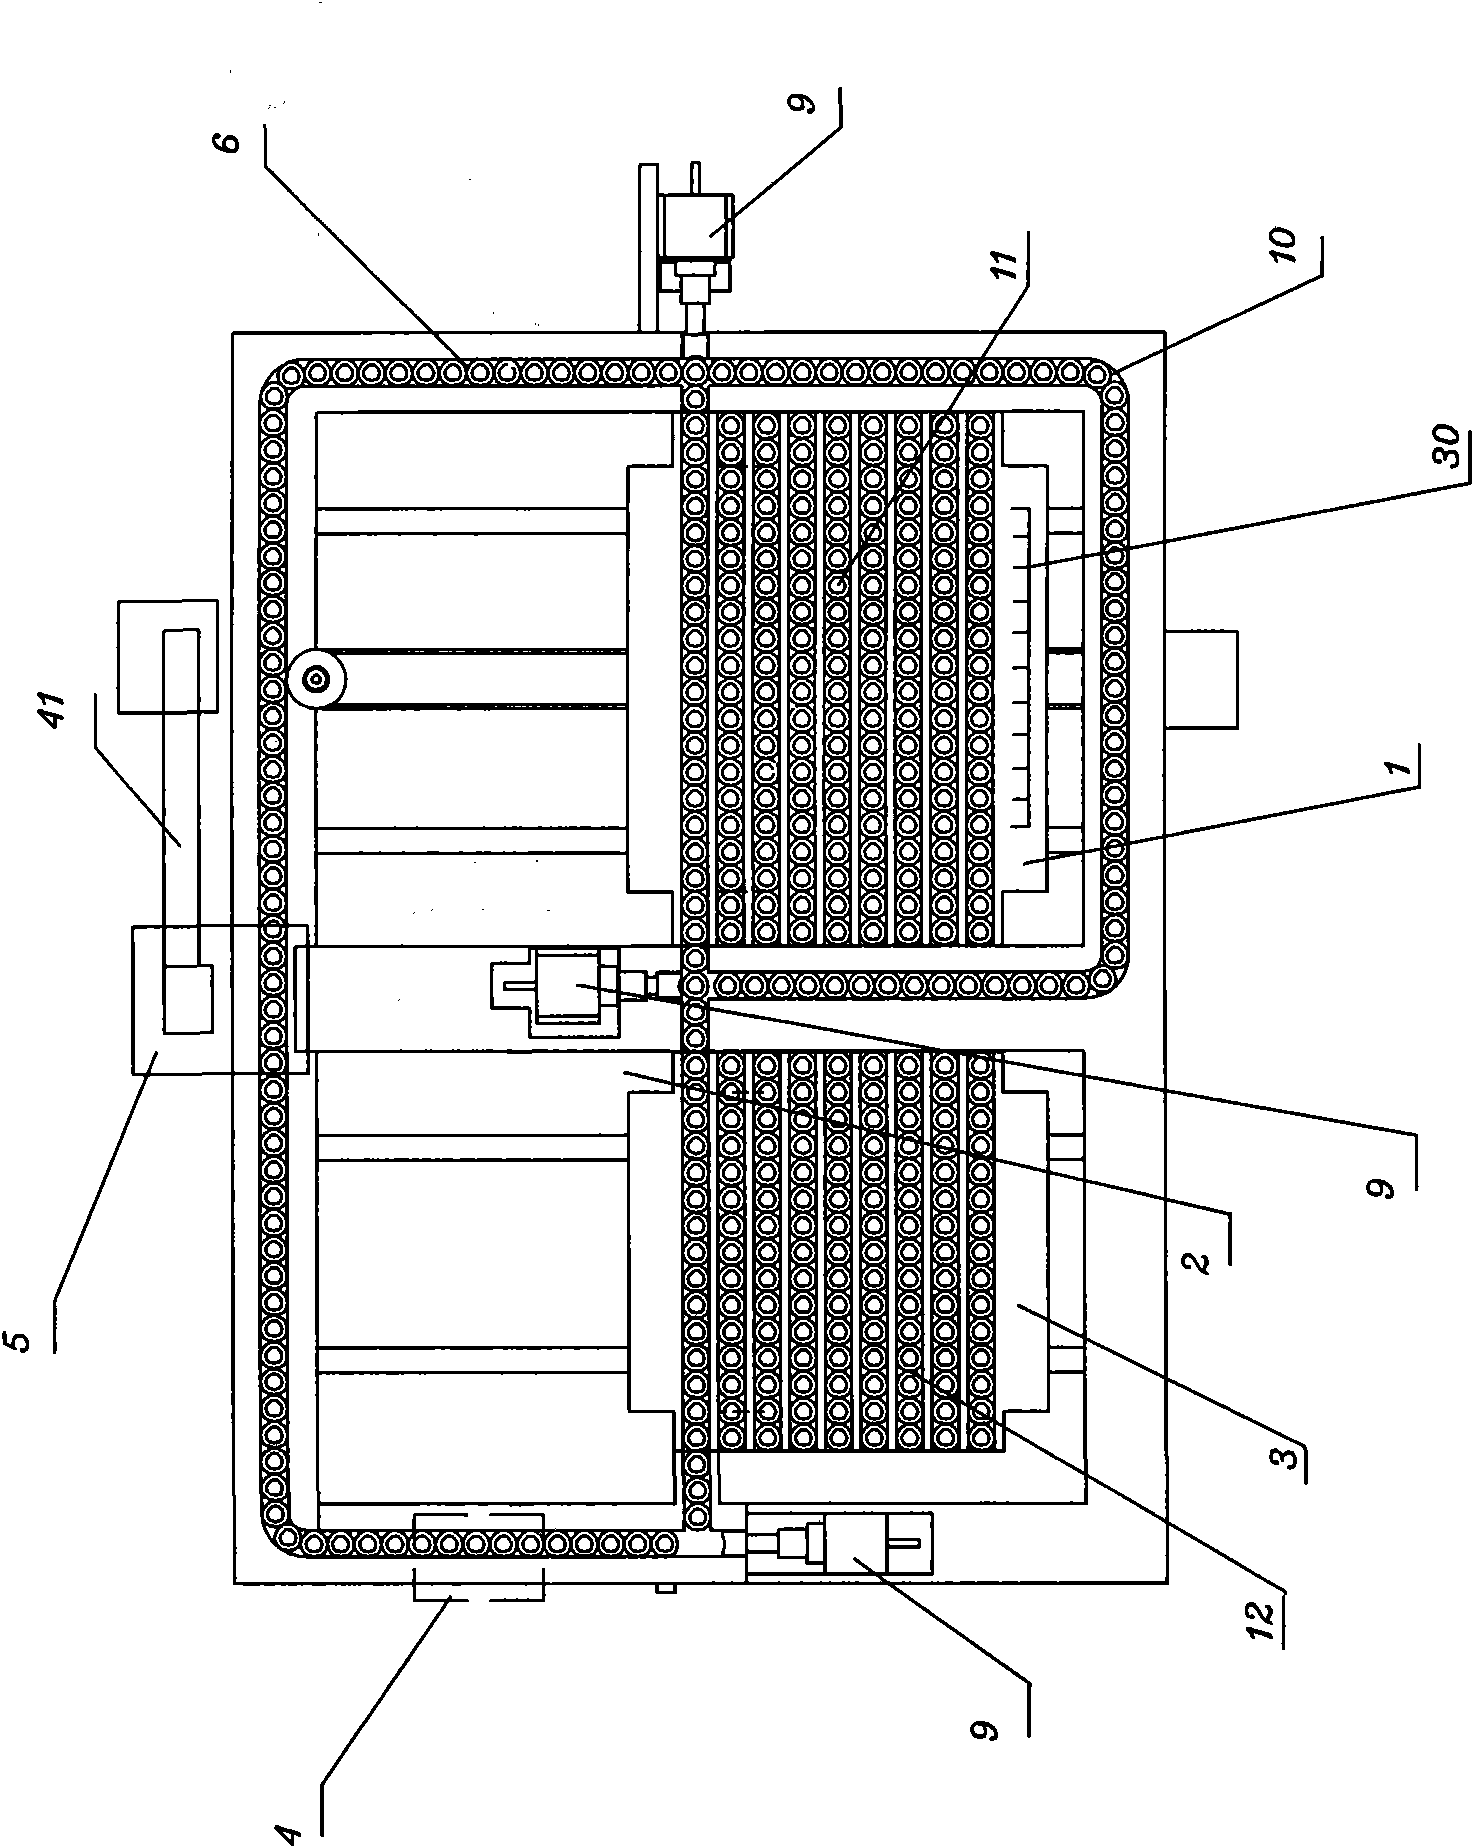 Full-automatic medical inspection and detection system